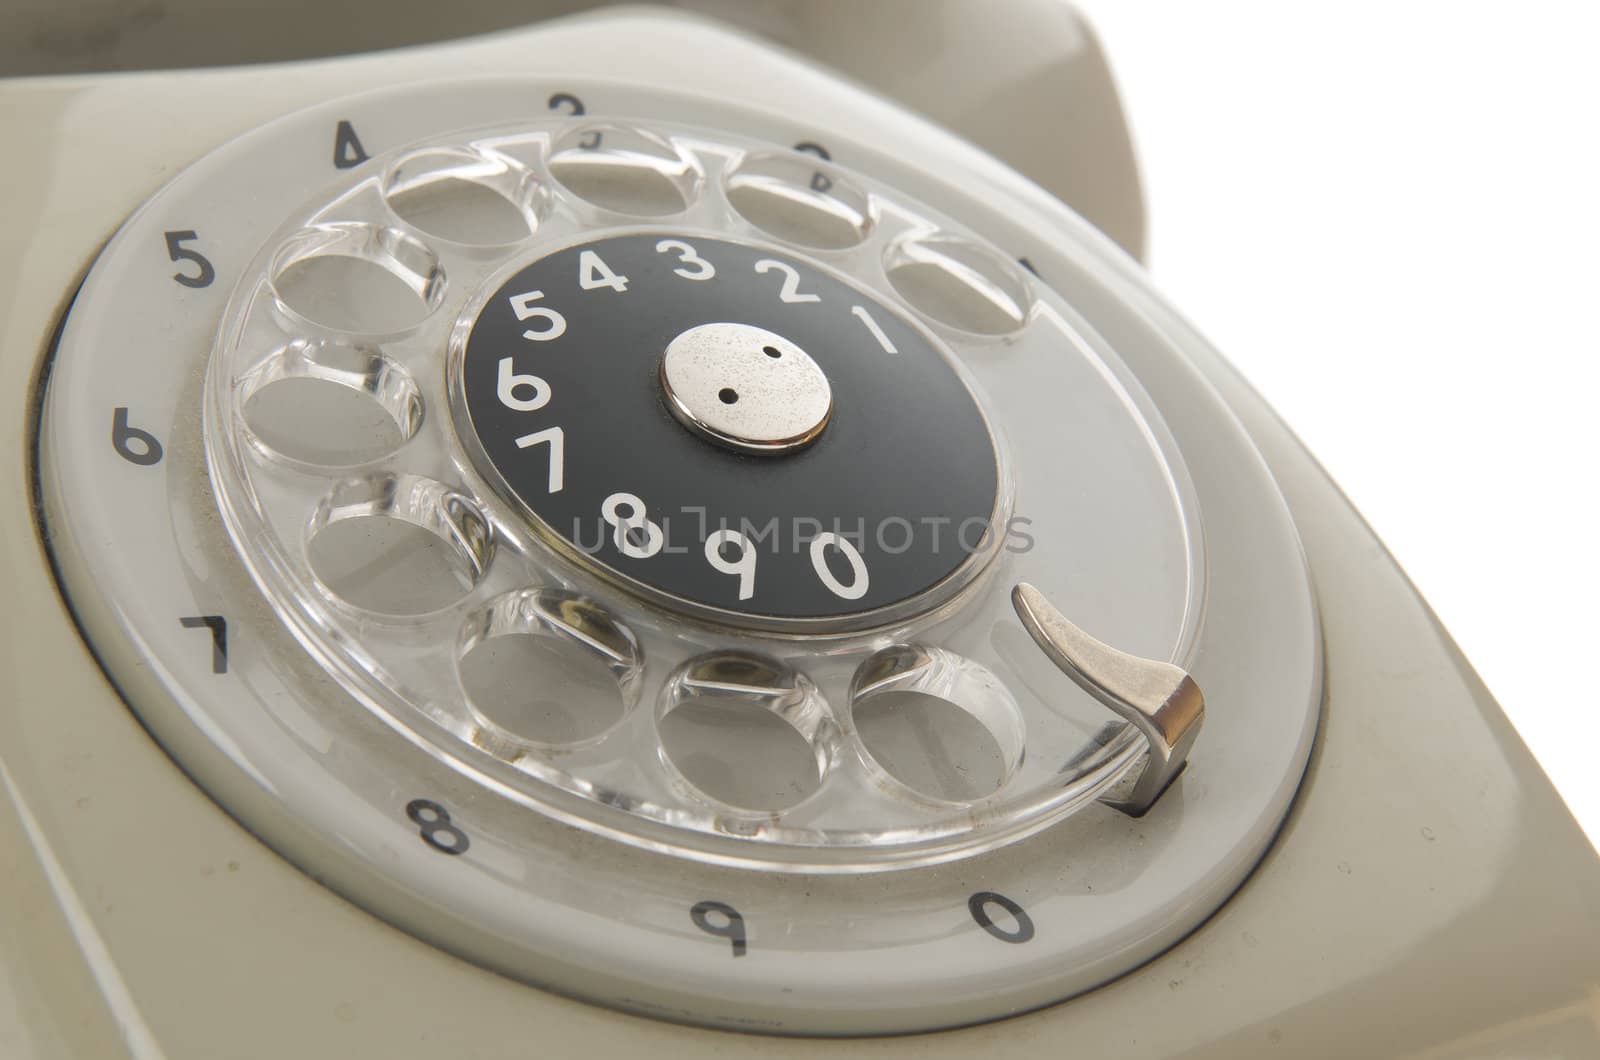 Rotary dial of an old phone by jogvan